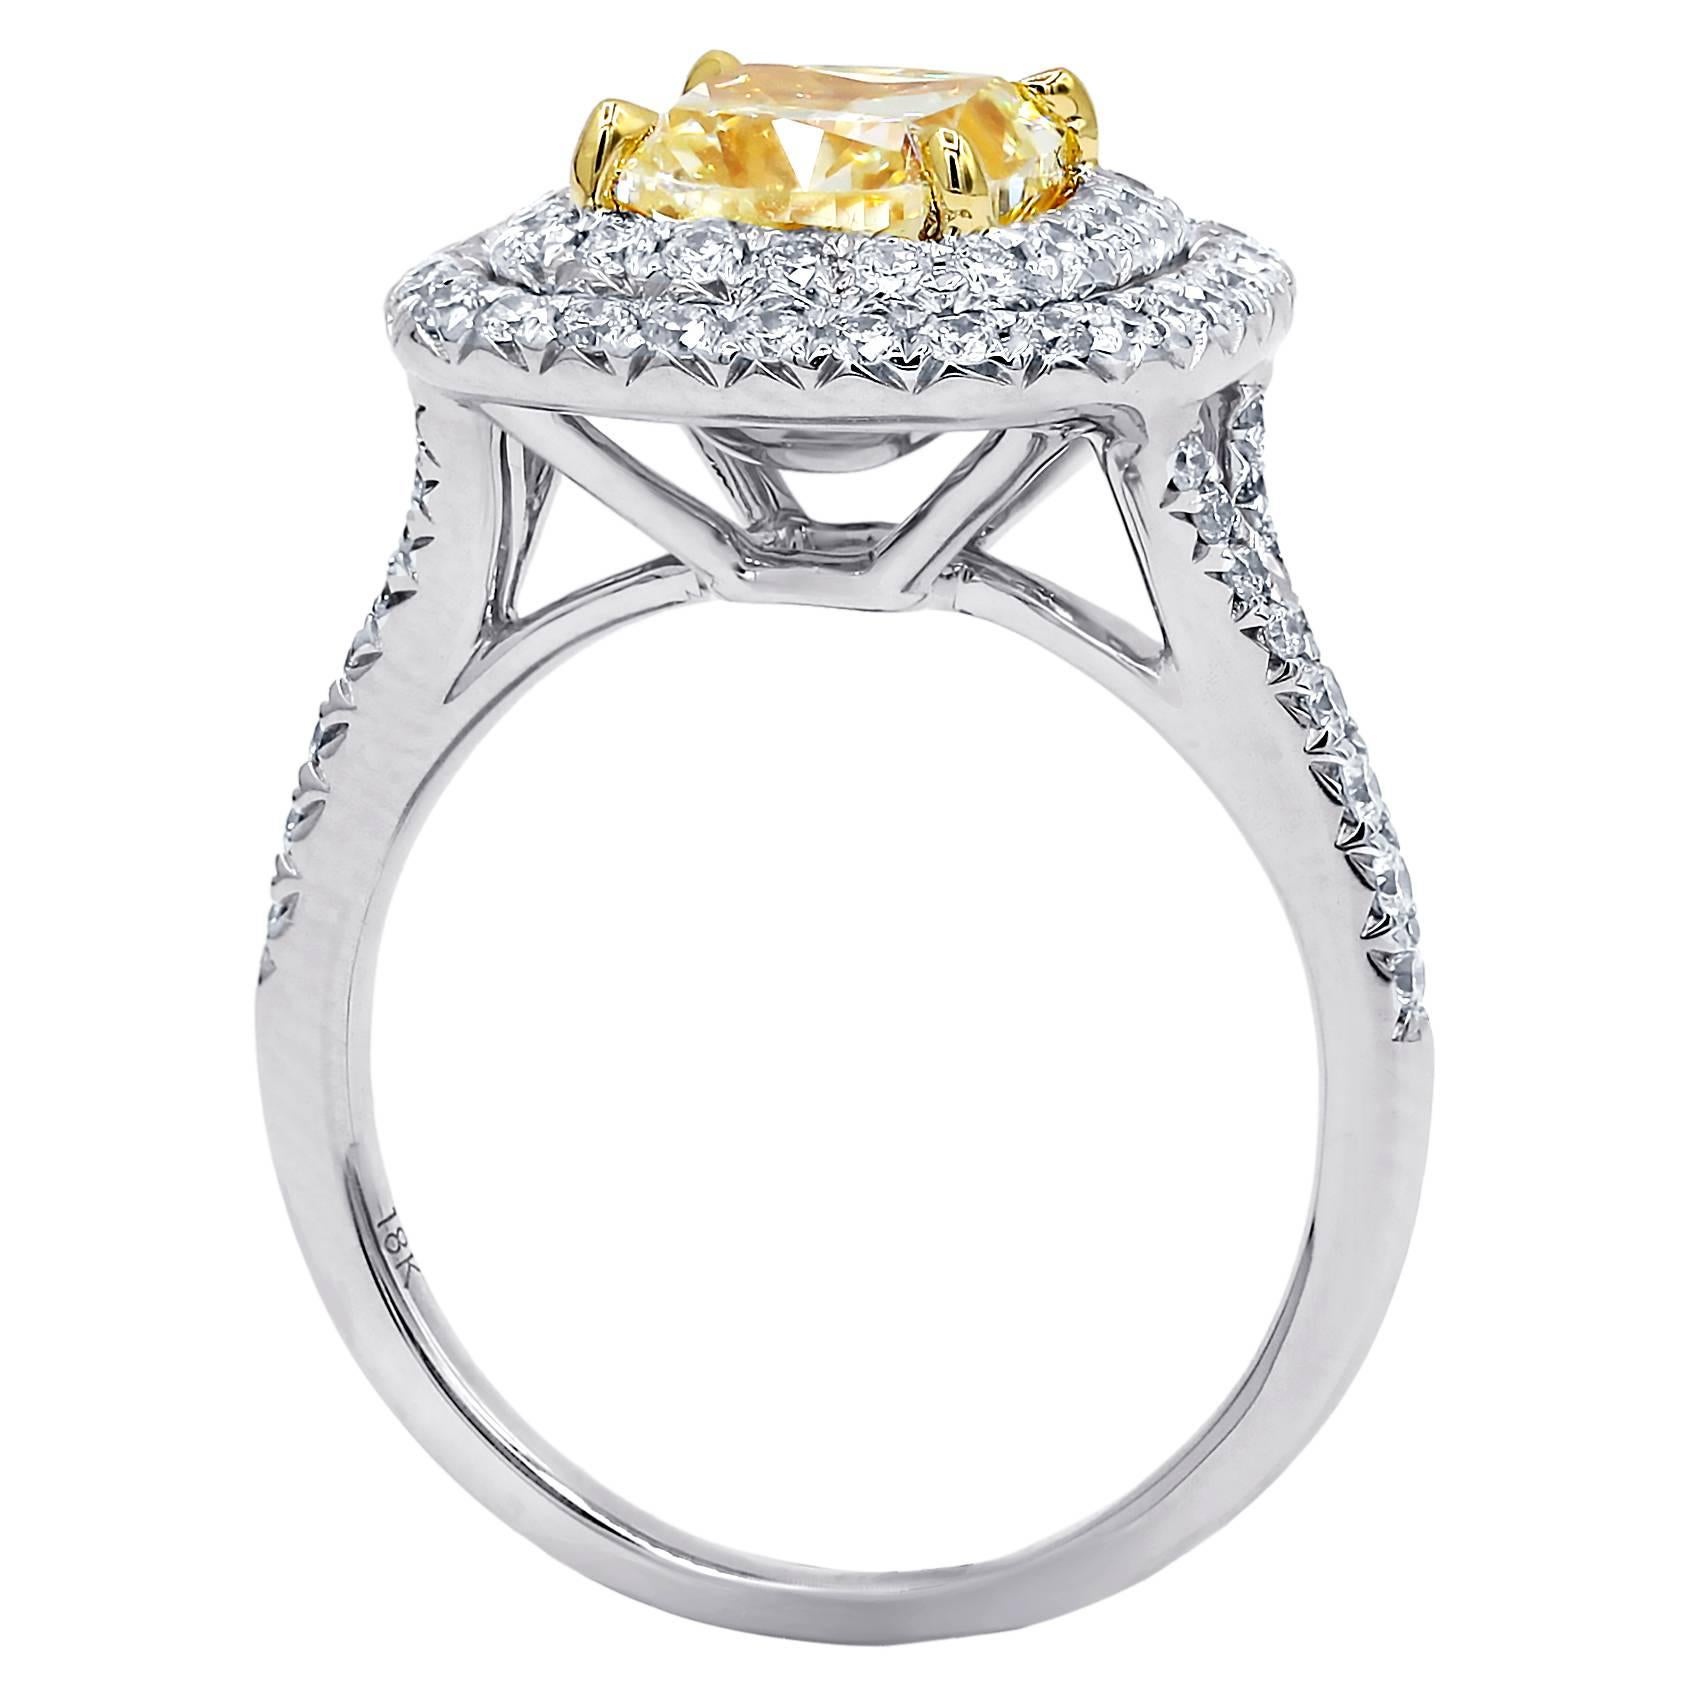 18 karat white gold diamond engagement ring with natural fancy yellow cushion modified brilliant cut diamond in the center,weighing 2.00 carats VS2 clarity set in beautiful double halo mounting and accented by 0.80 carats total round cut diamonds on